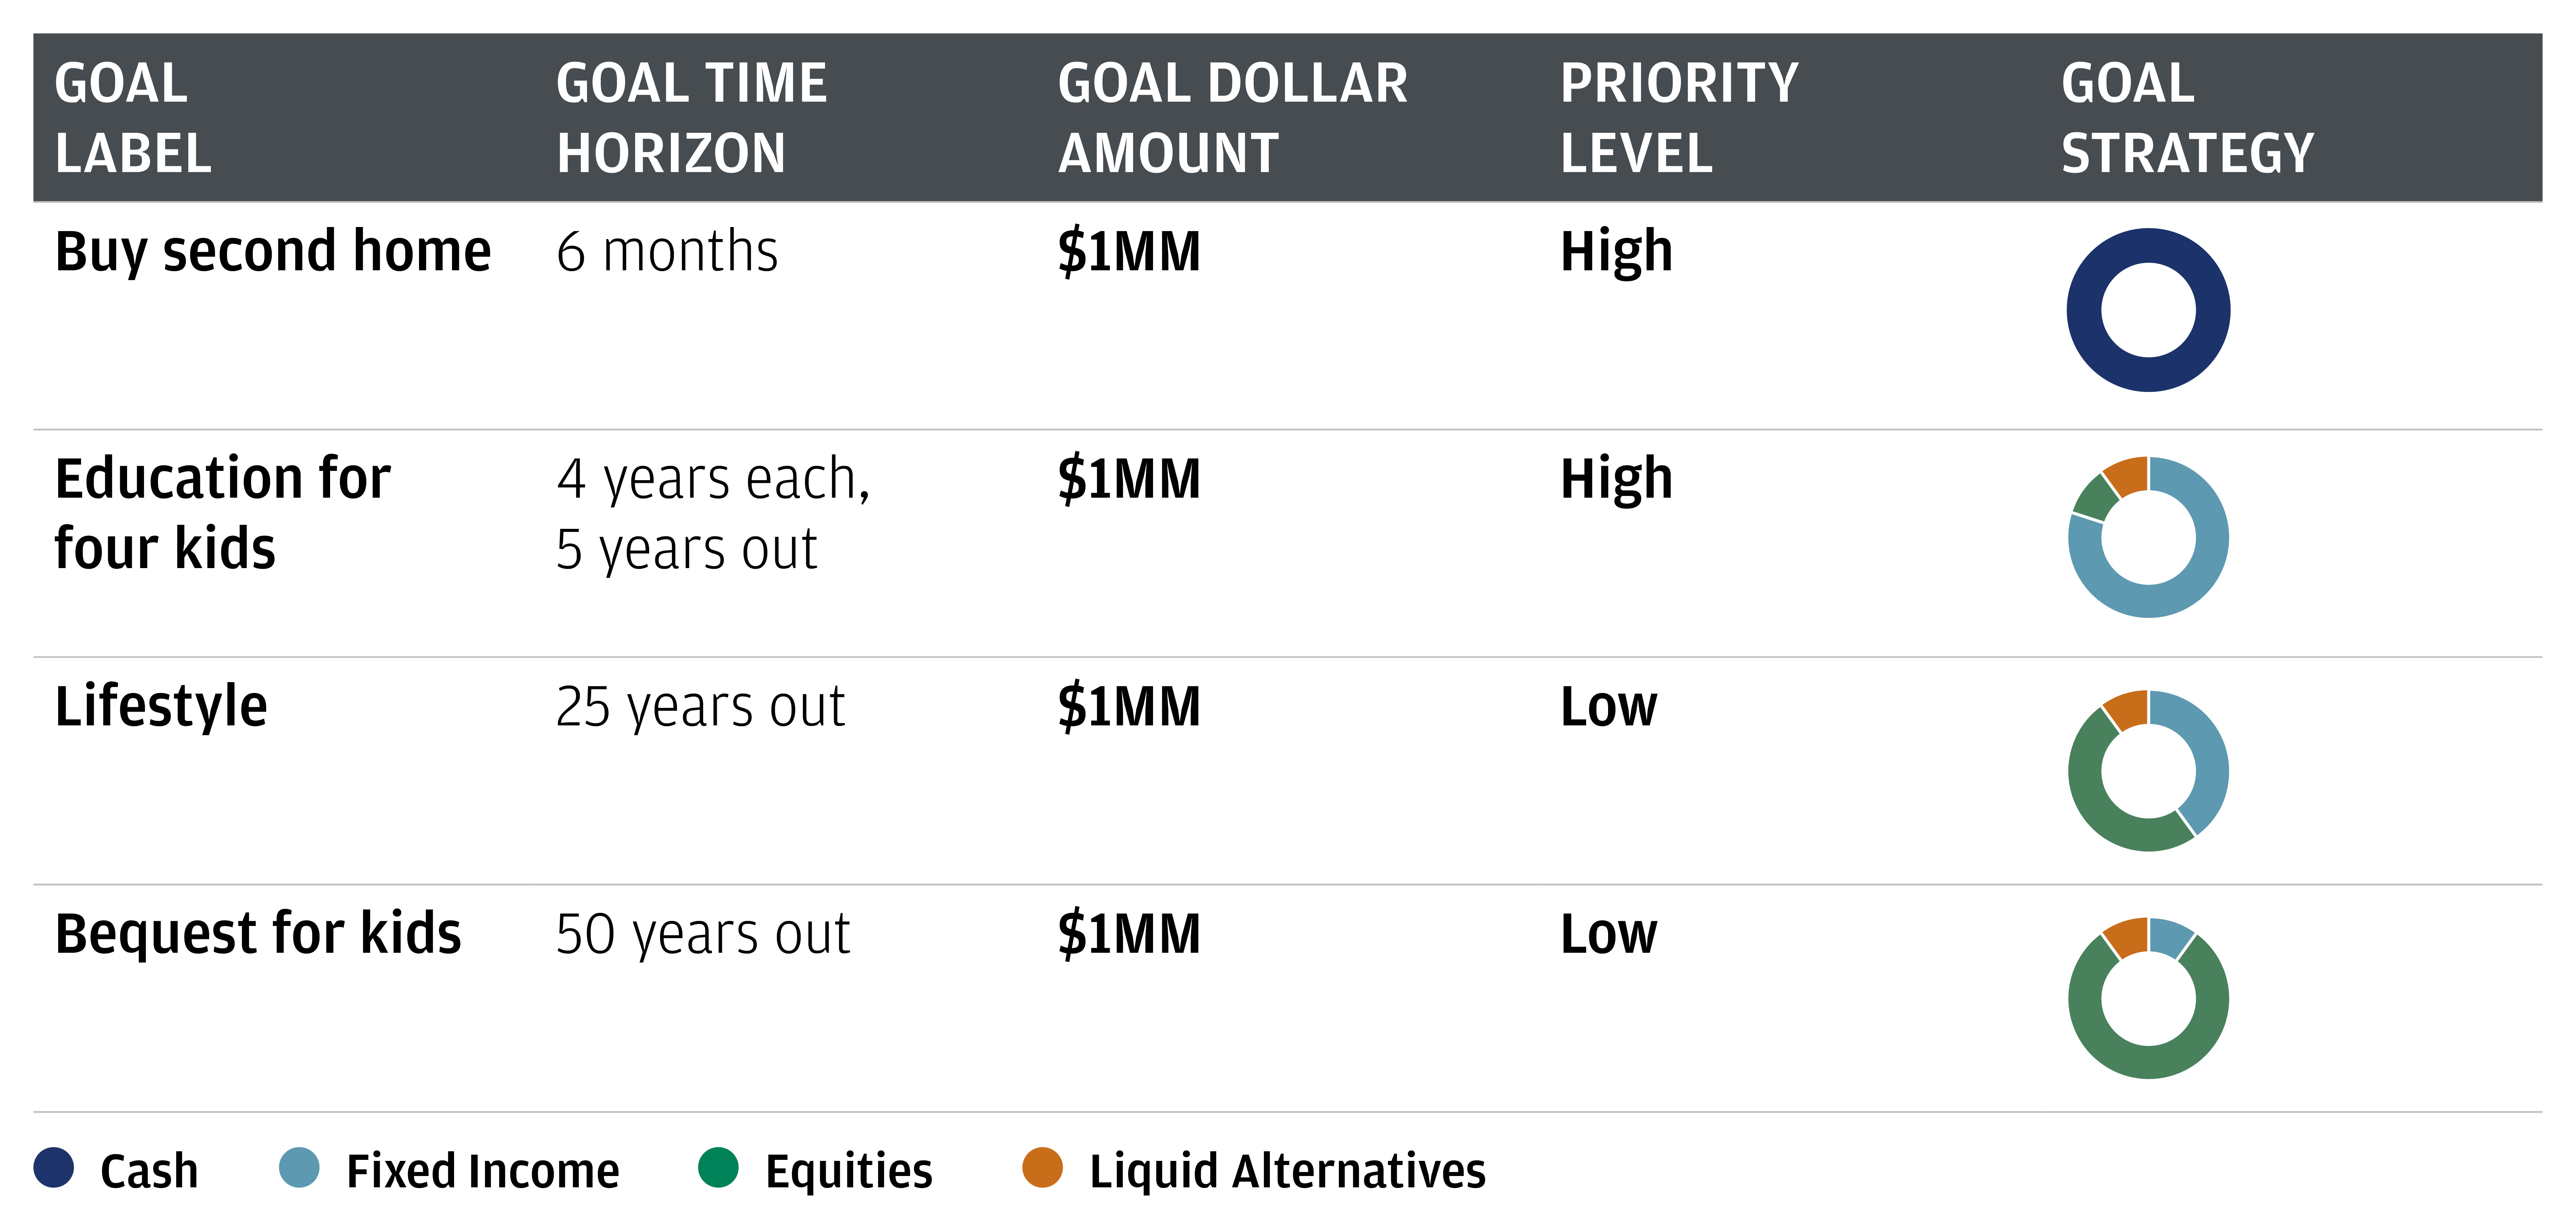 This table demonstrates how you could allocate $1 million differently depending on the goal, time horizon, priority level and goal investment strategy